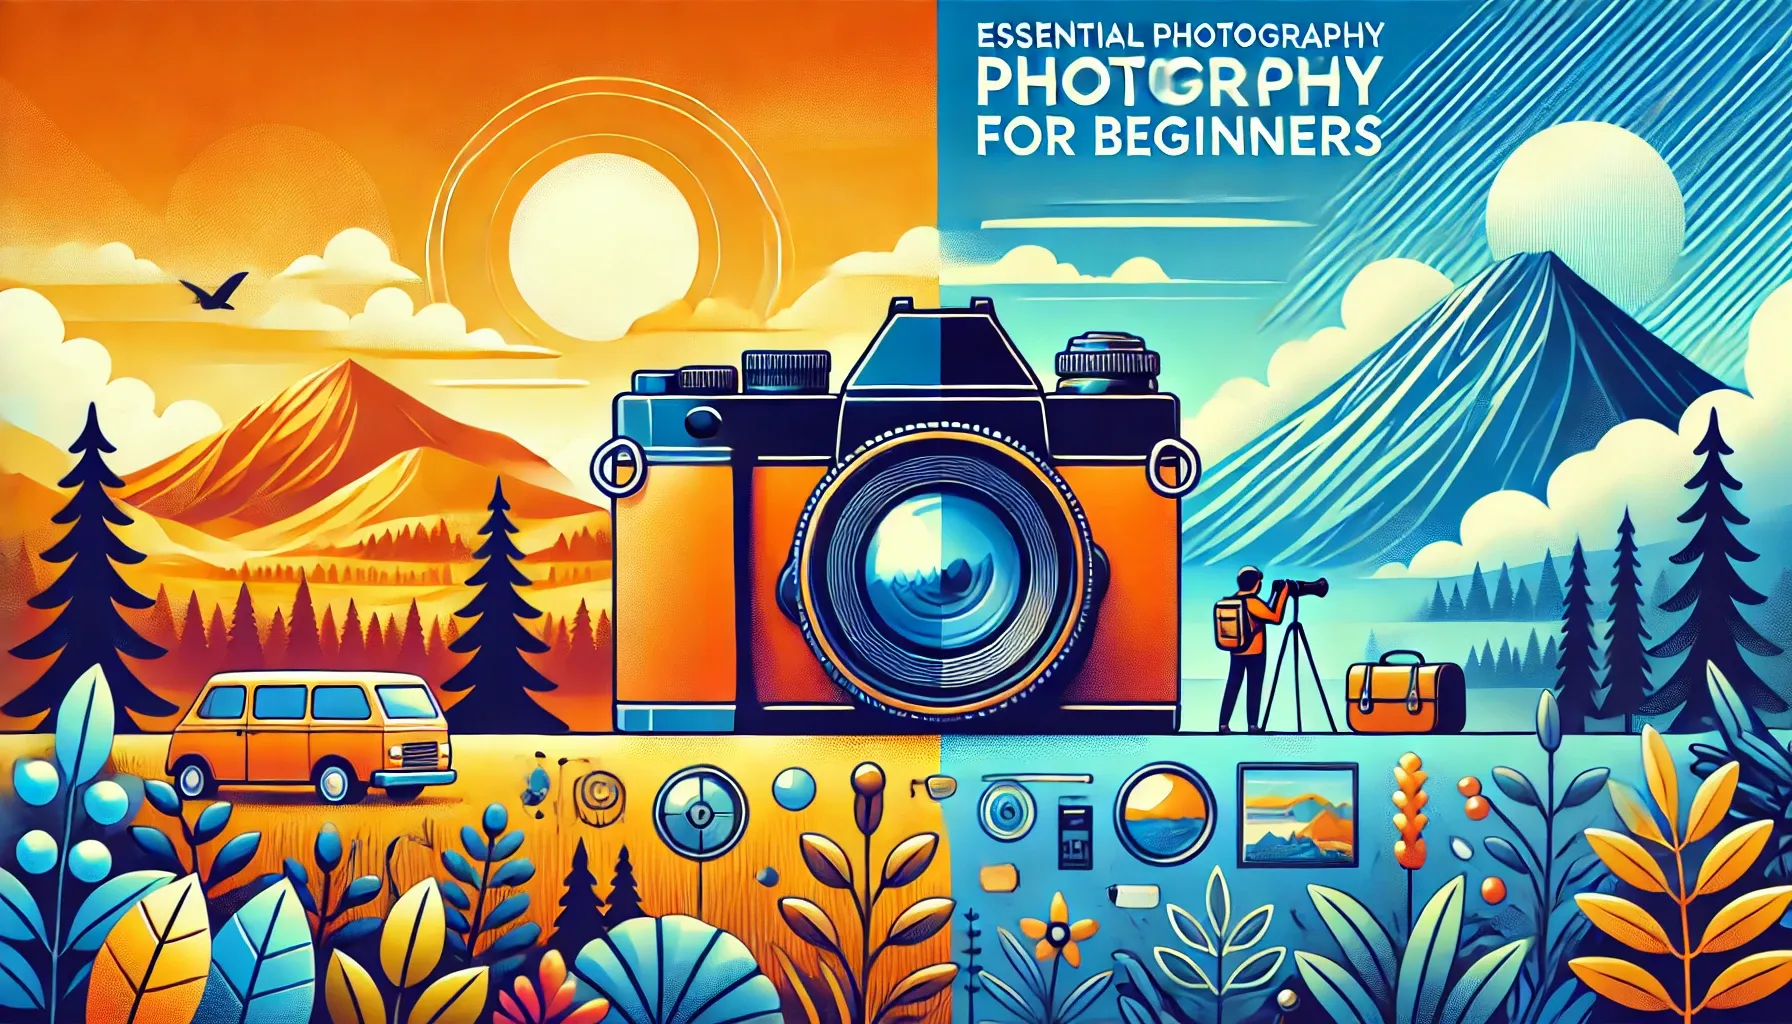 Essential photography tips for beginners